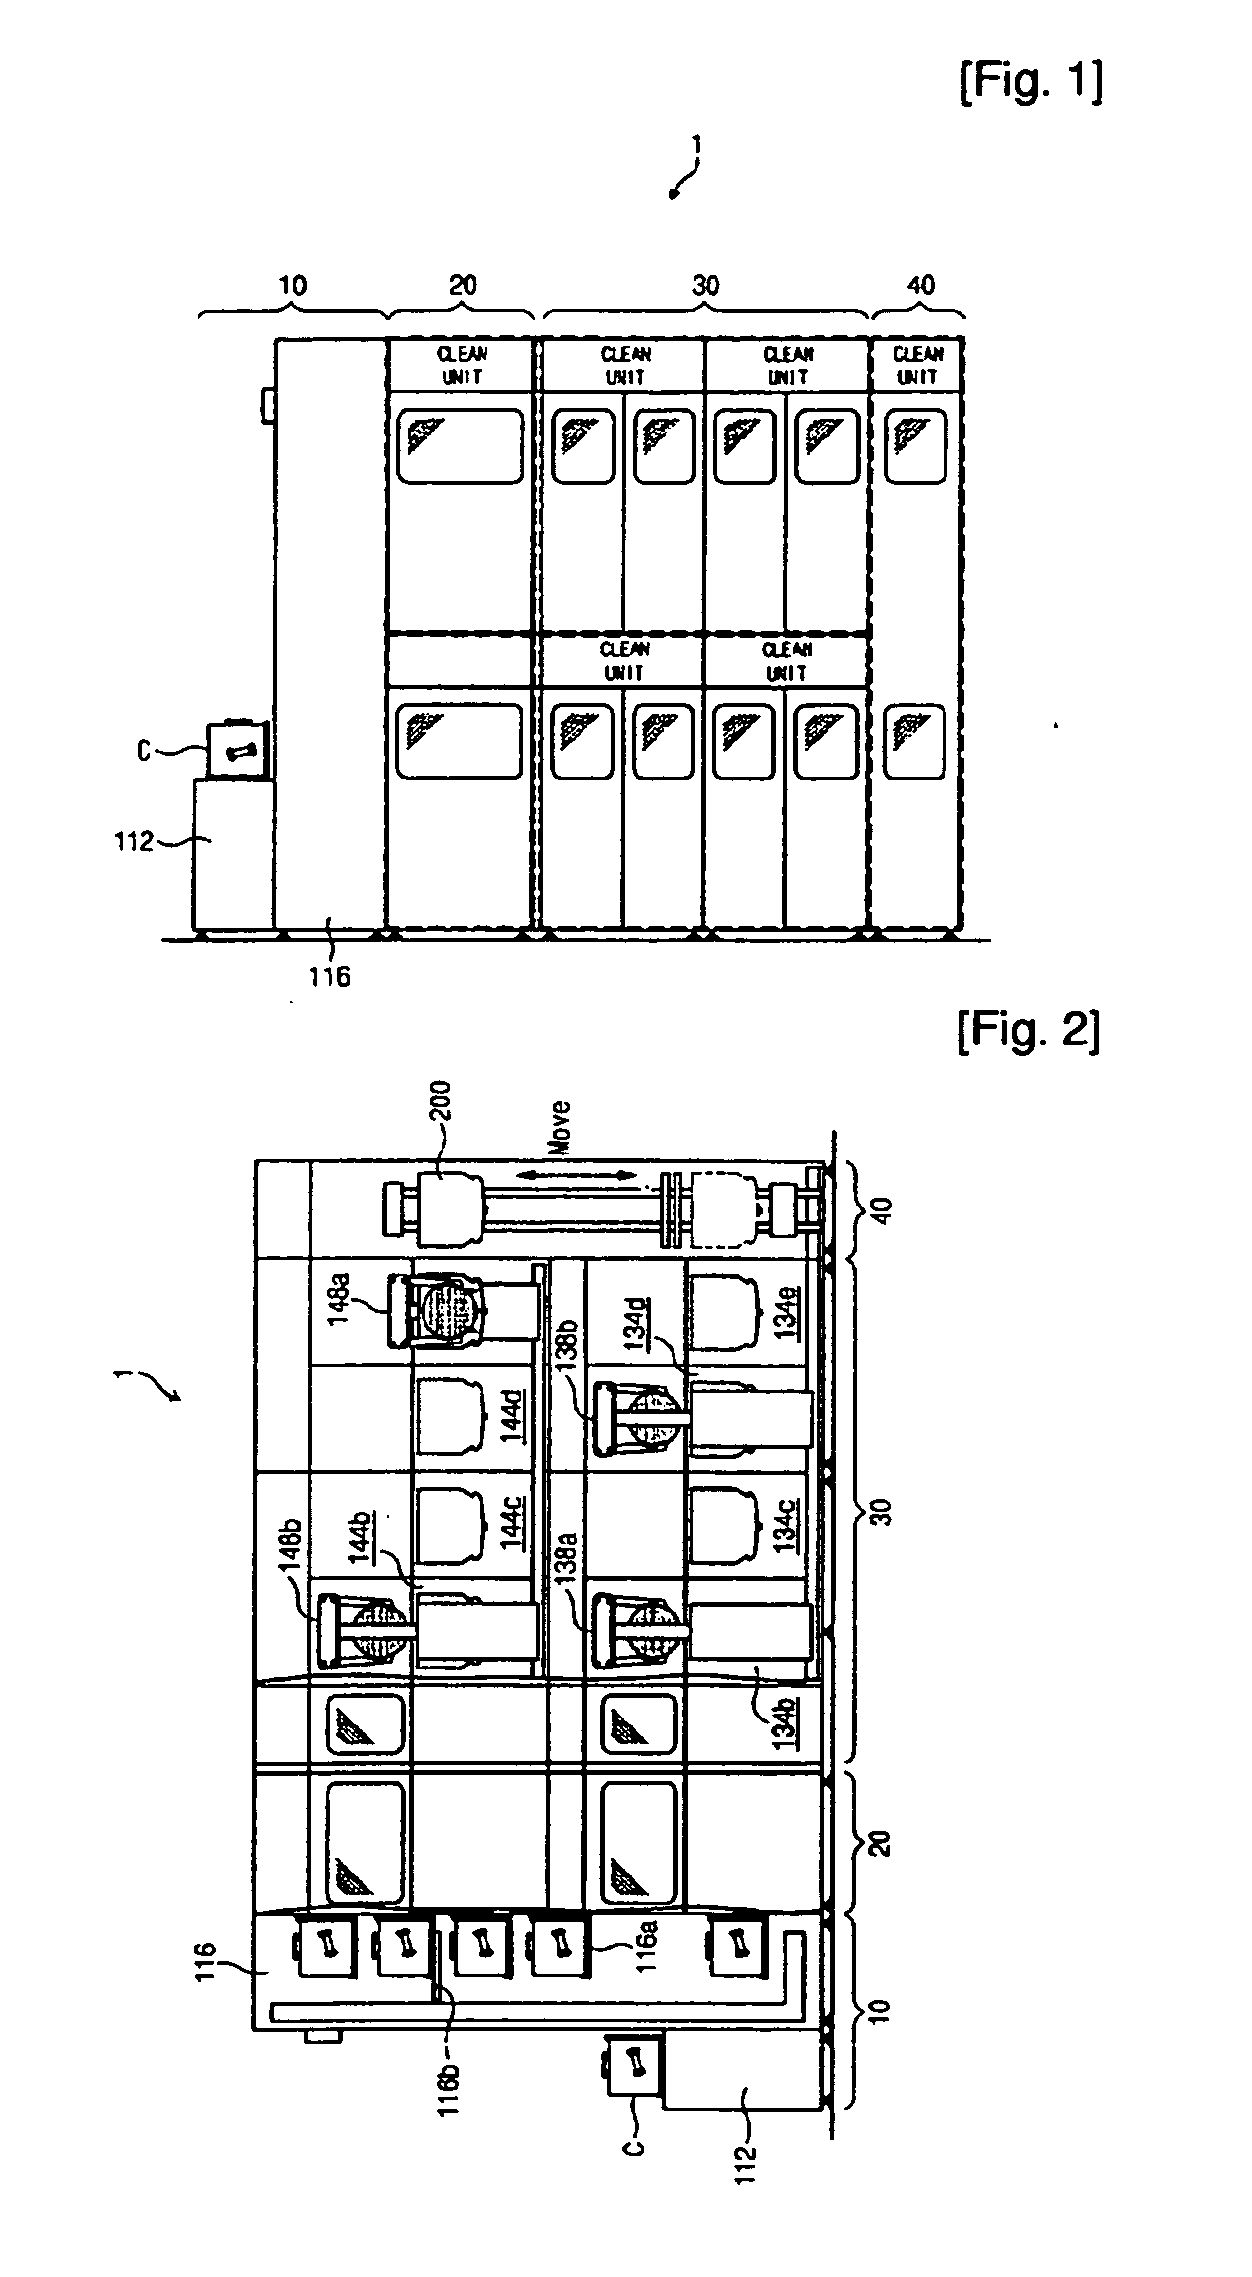 Facility with Multi-Storied Process Chamber for Cleaning Substrates and Method for Cleaning Substrates Using the Facility